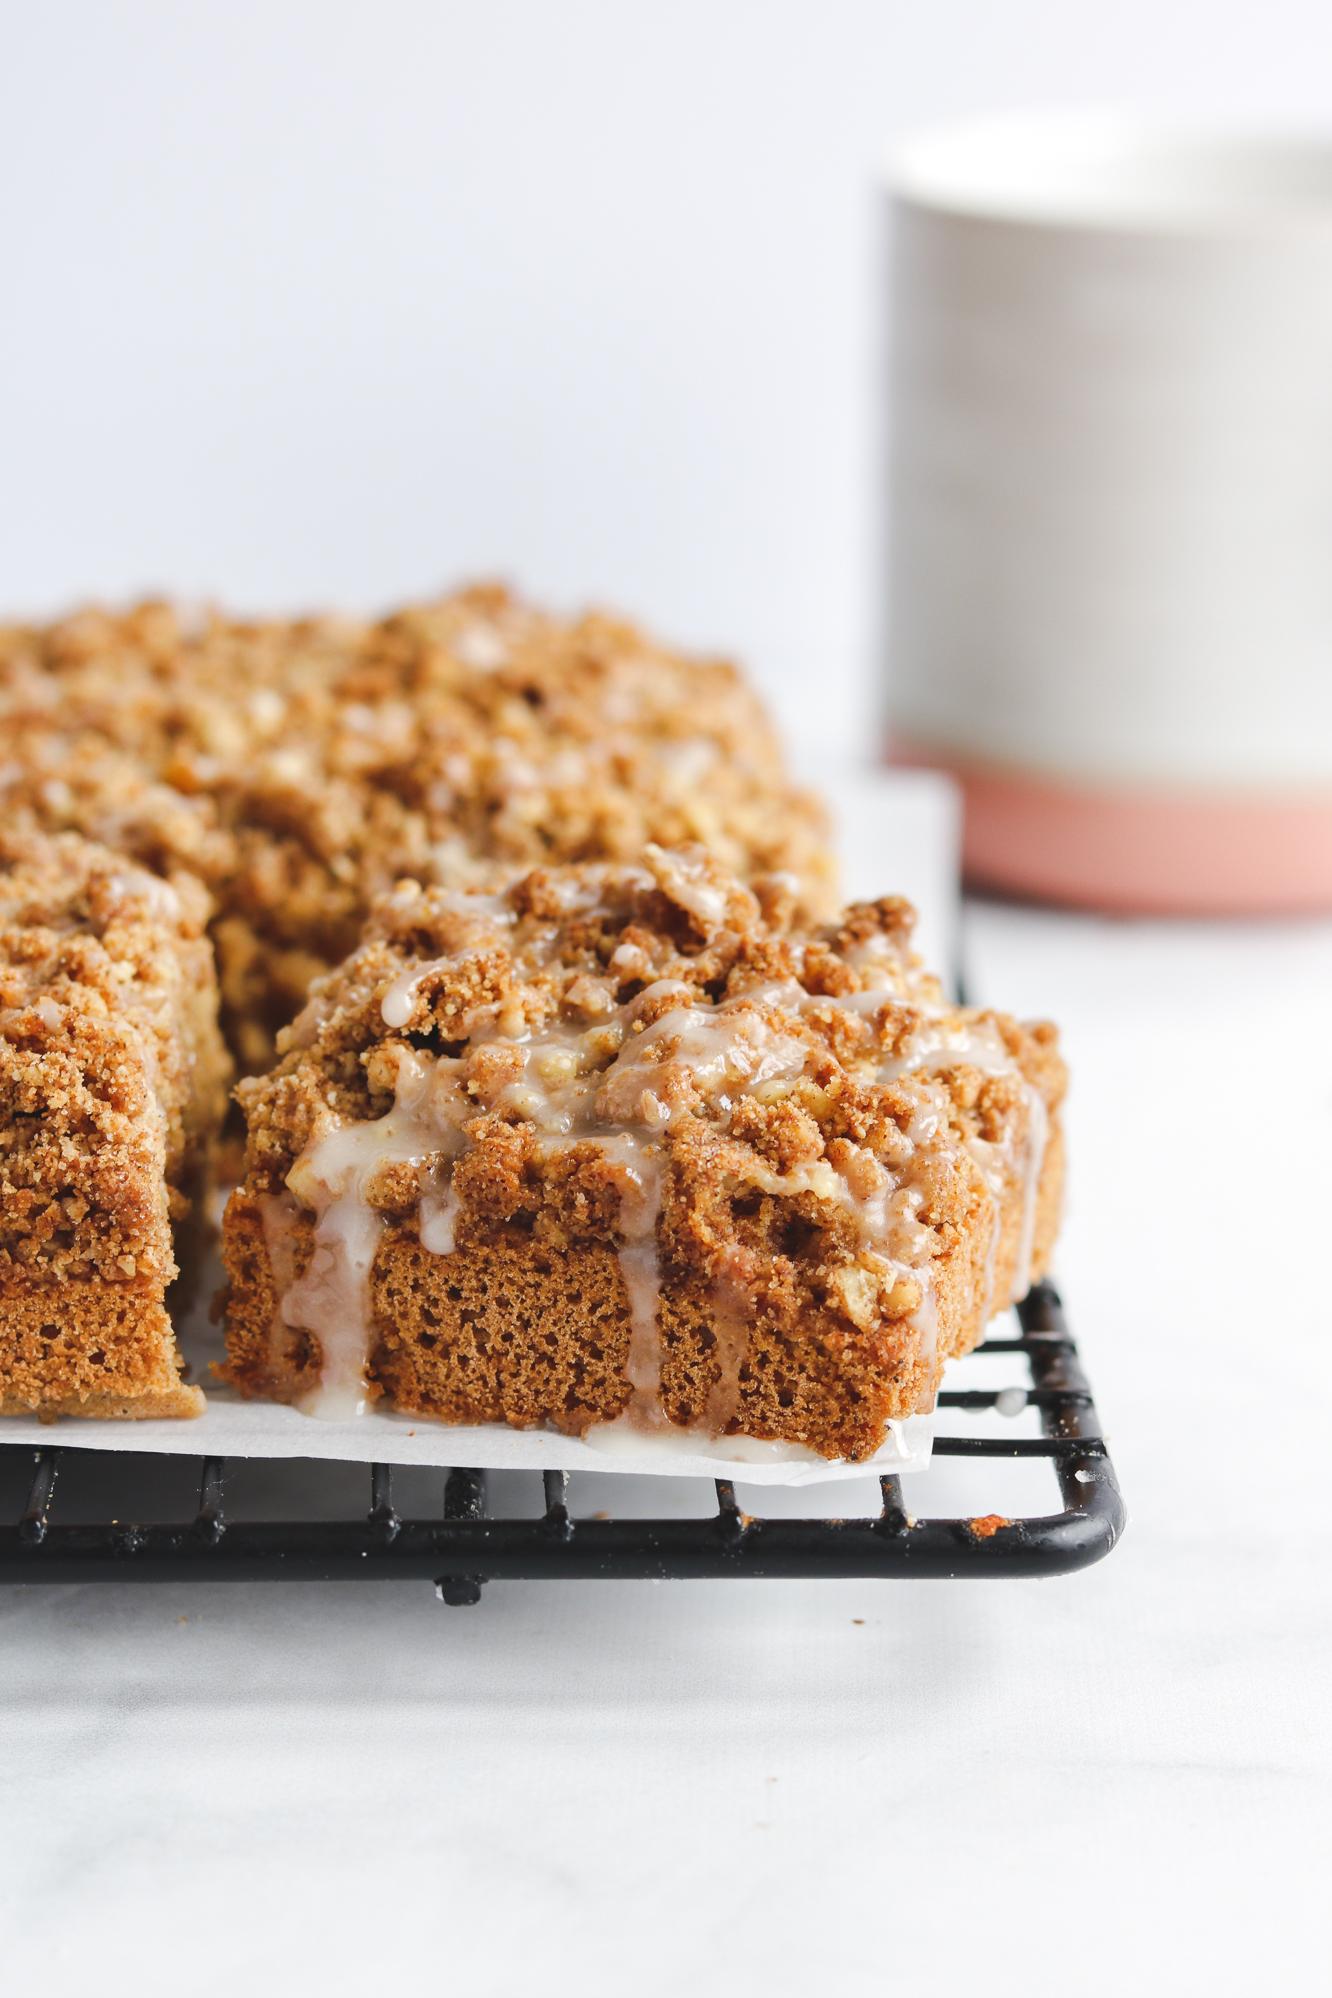  Wake up your taste buds with this scrumptious and guilt-free coffee cake.